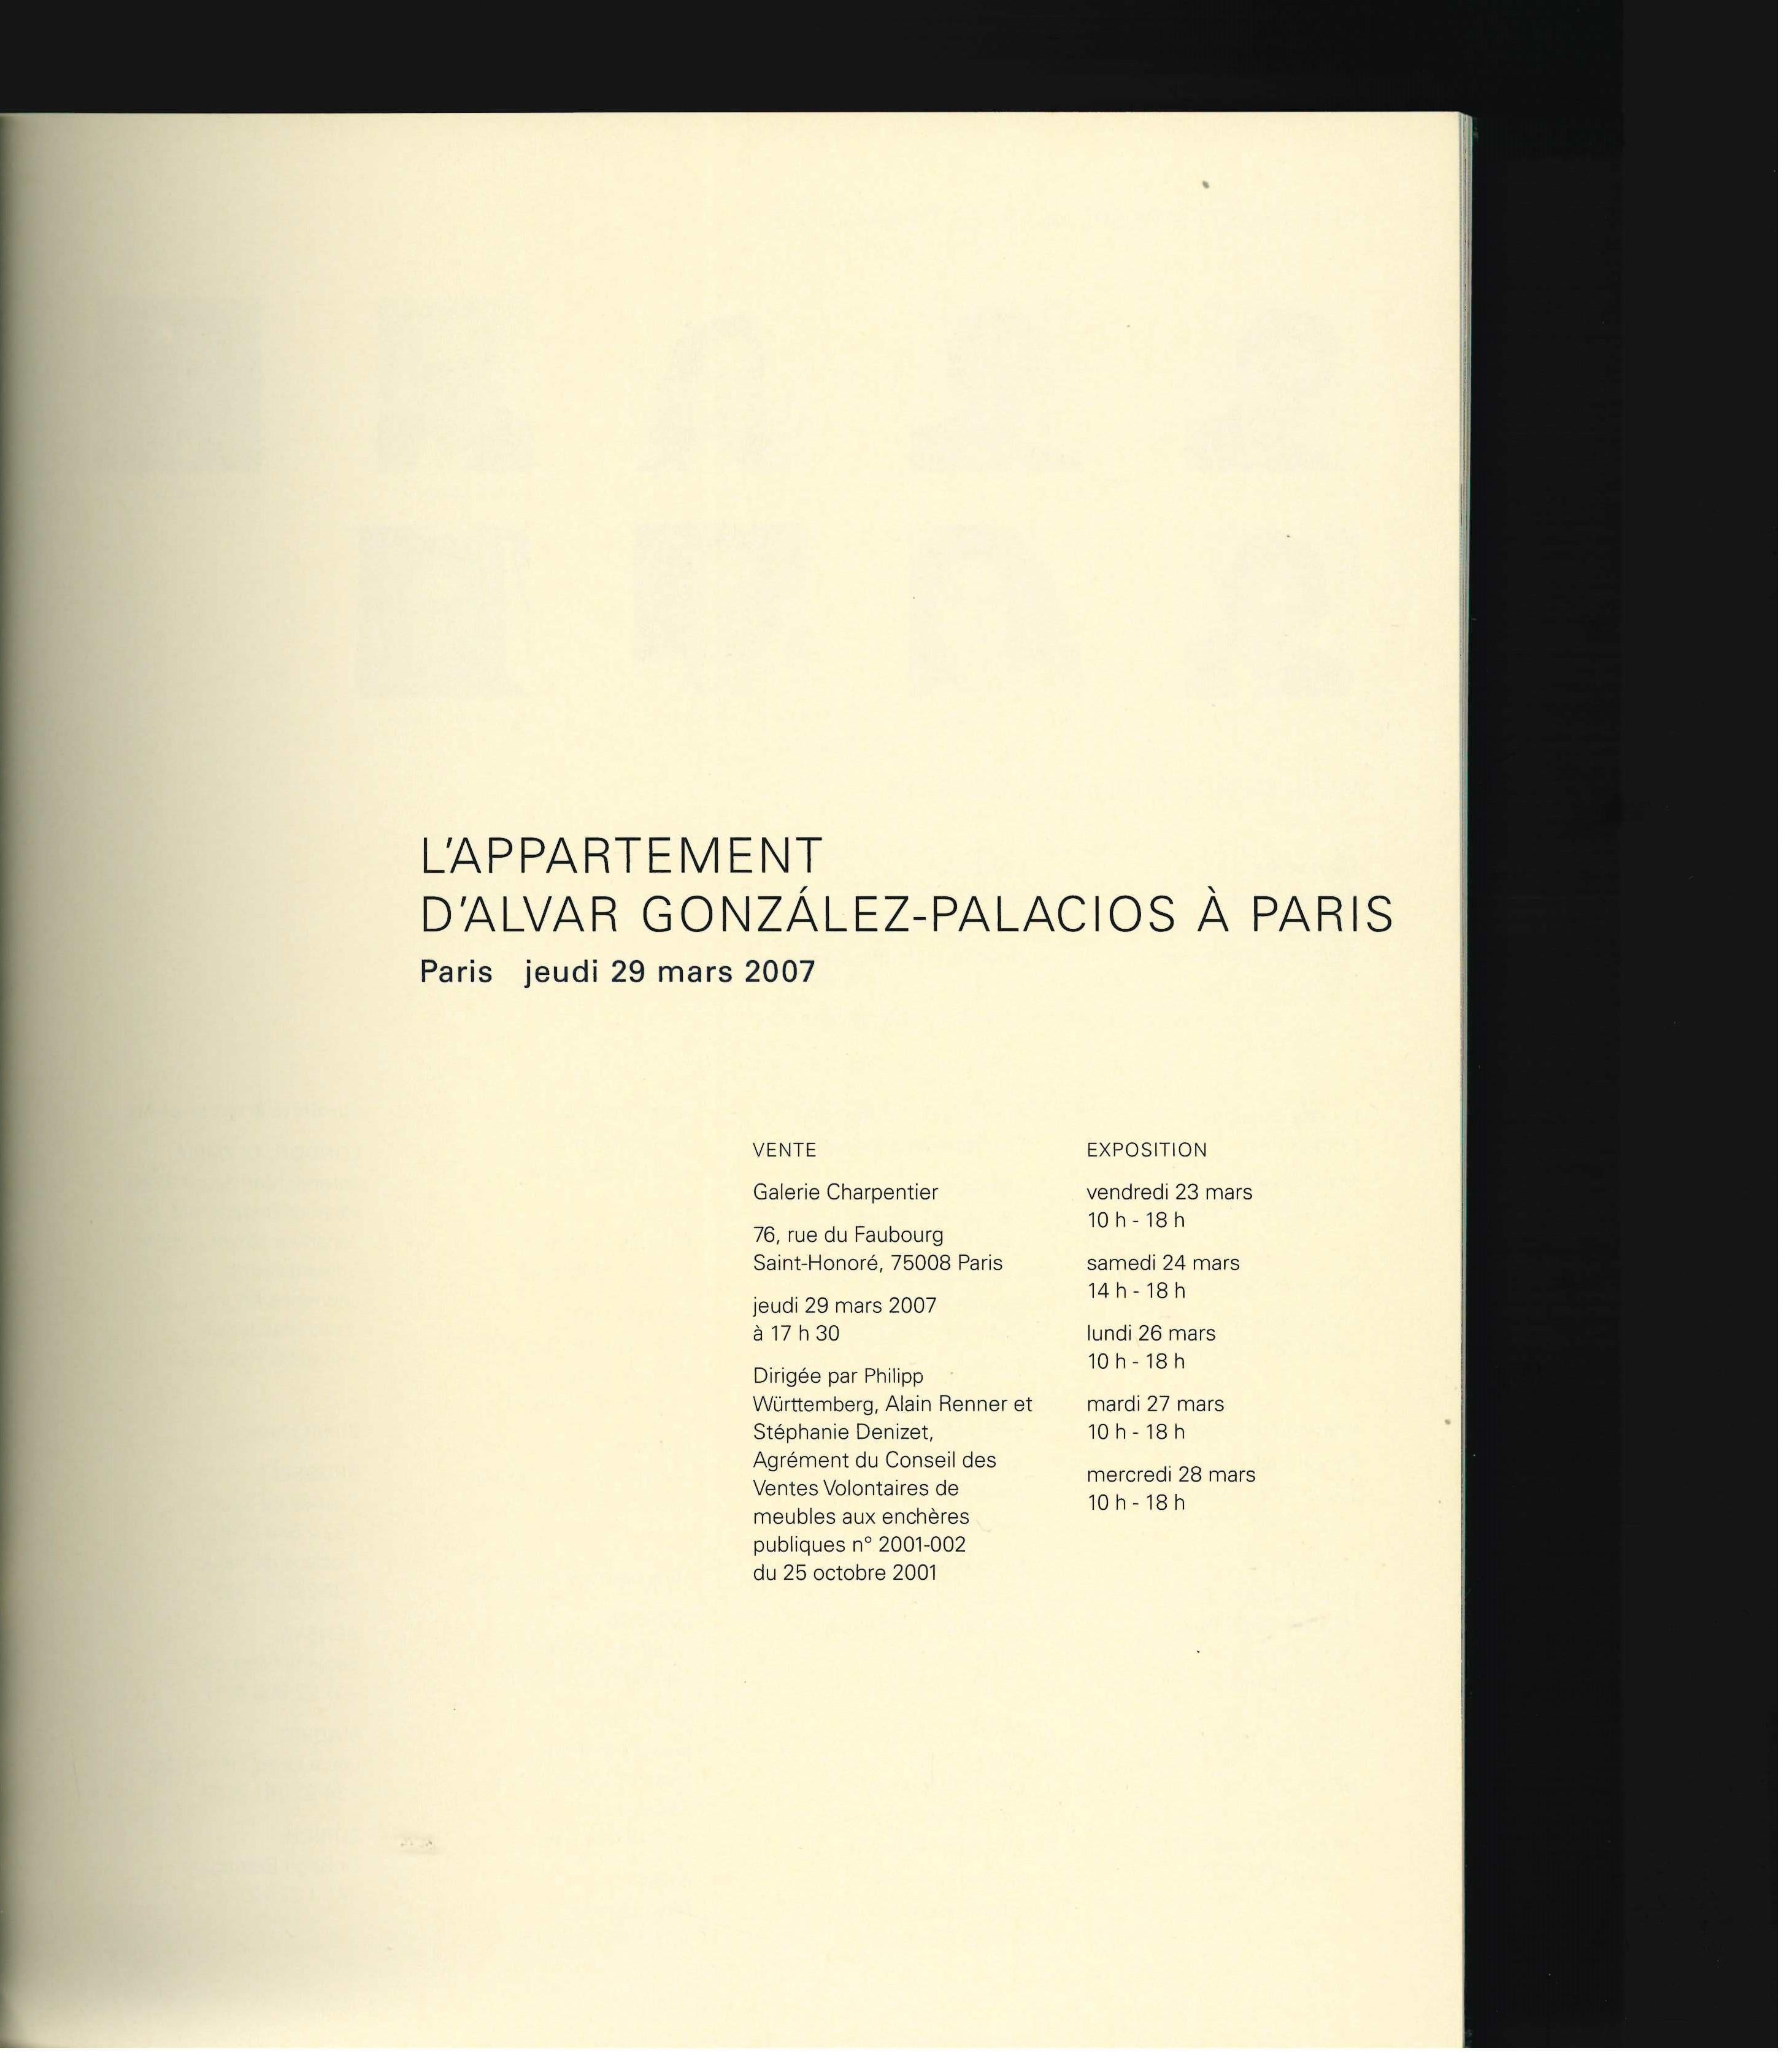 This is the catalogue produced by Sotheby's in 2007 for the sale of art, furniture and furnishings from the Paris apartment of renowned art expert Alvar Gonzalez-Palacios. Among the 122 lots offered for sale are pieces by Matteo Rosselli and